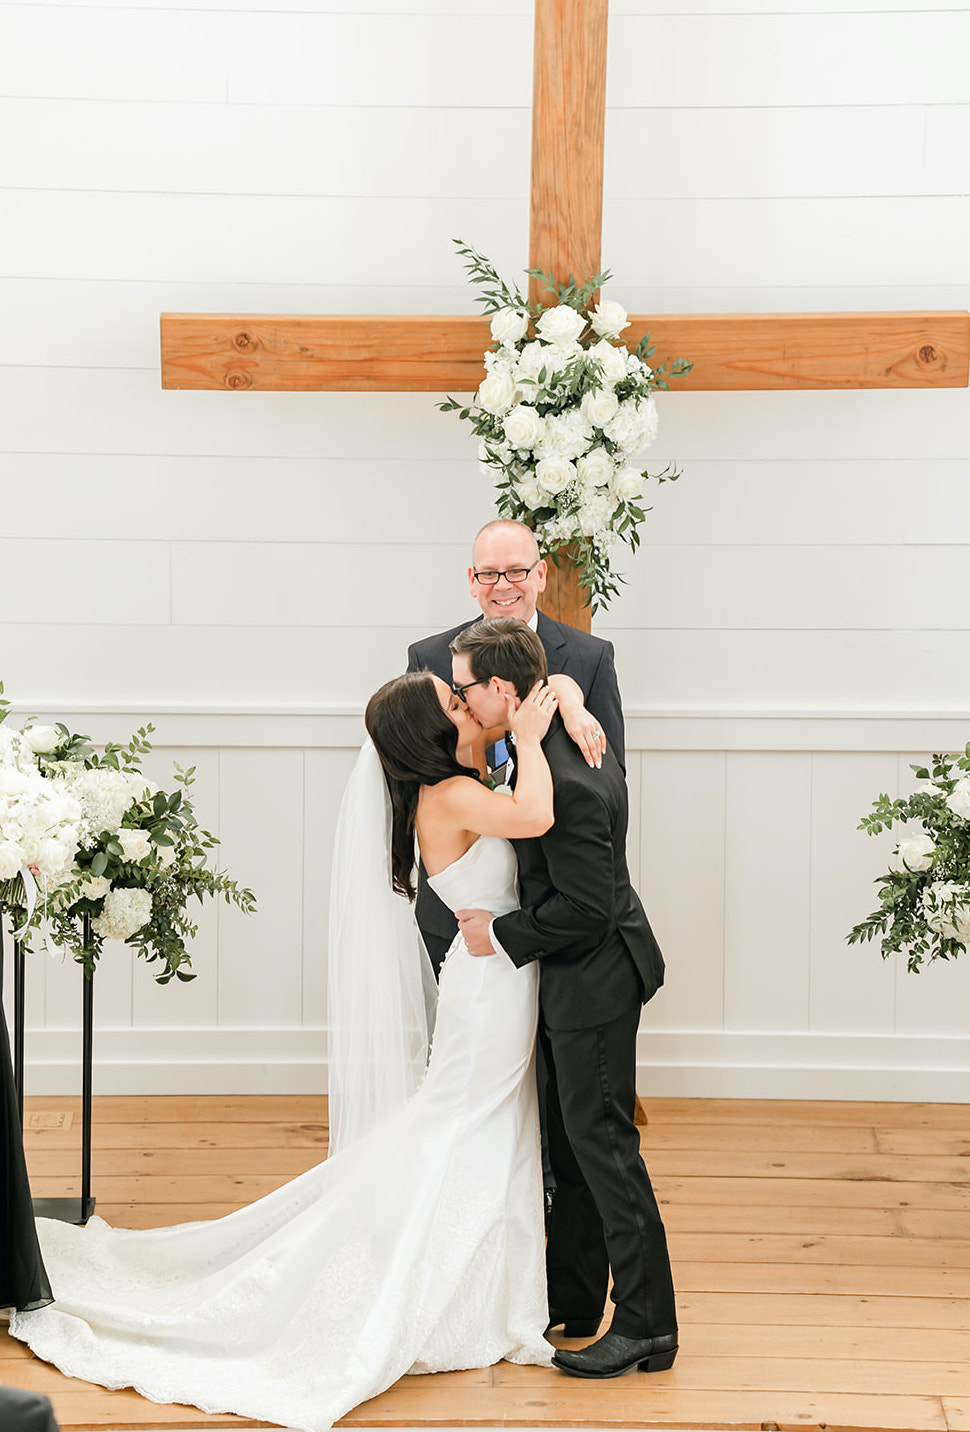 A bride and groom kiss at the altar of their elegant summer wedding in Montgomery, TX.